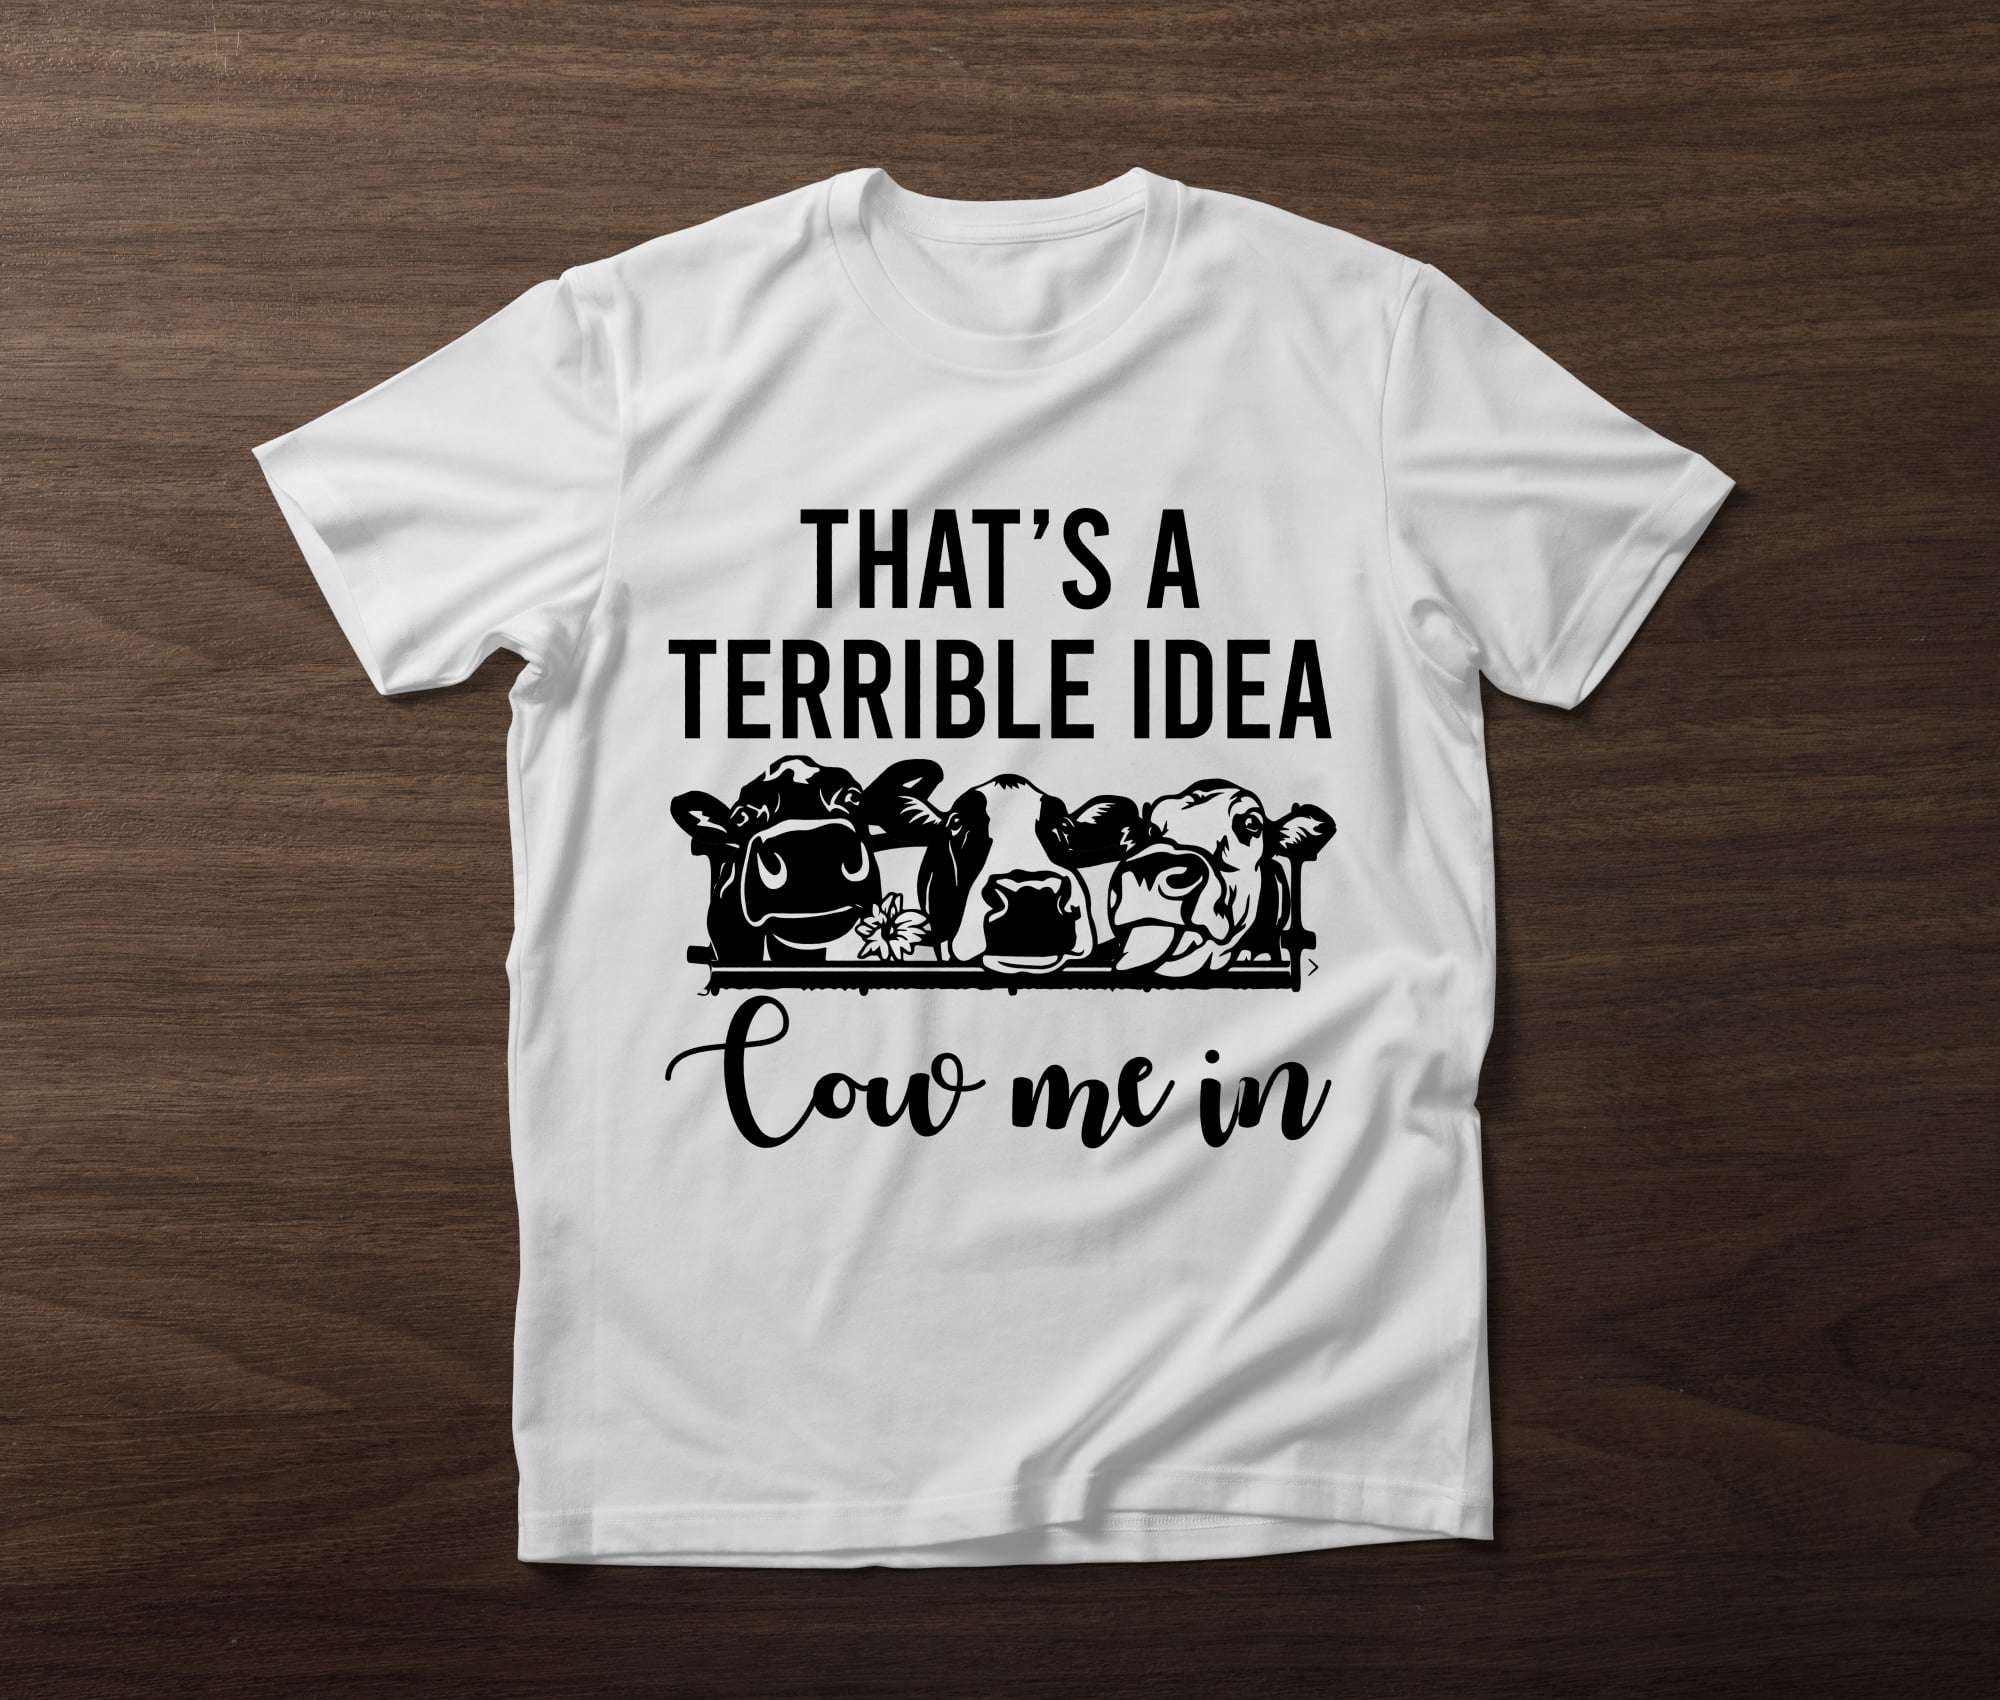 That's a terrible idea cow me in - Funny cow graphic T-shirt, gift for cow person